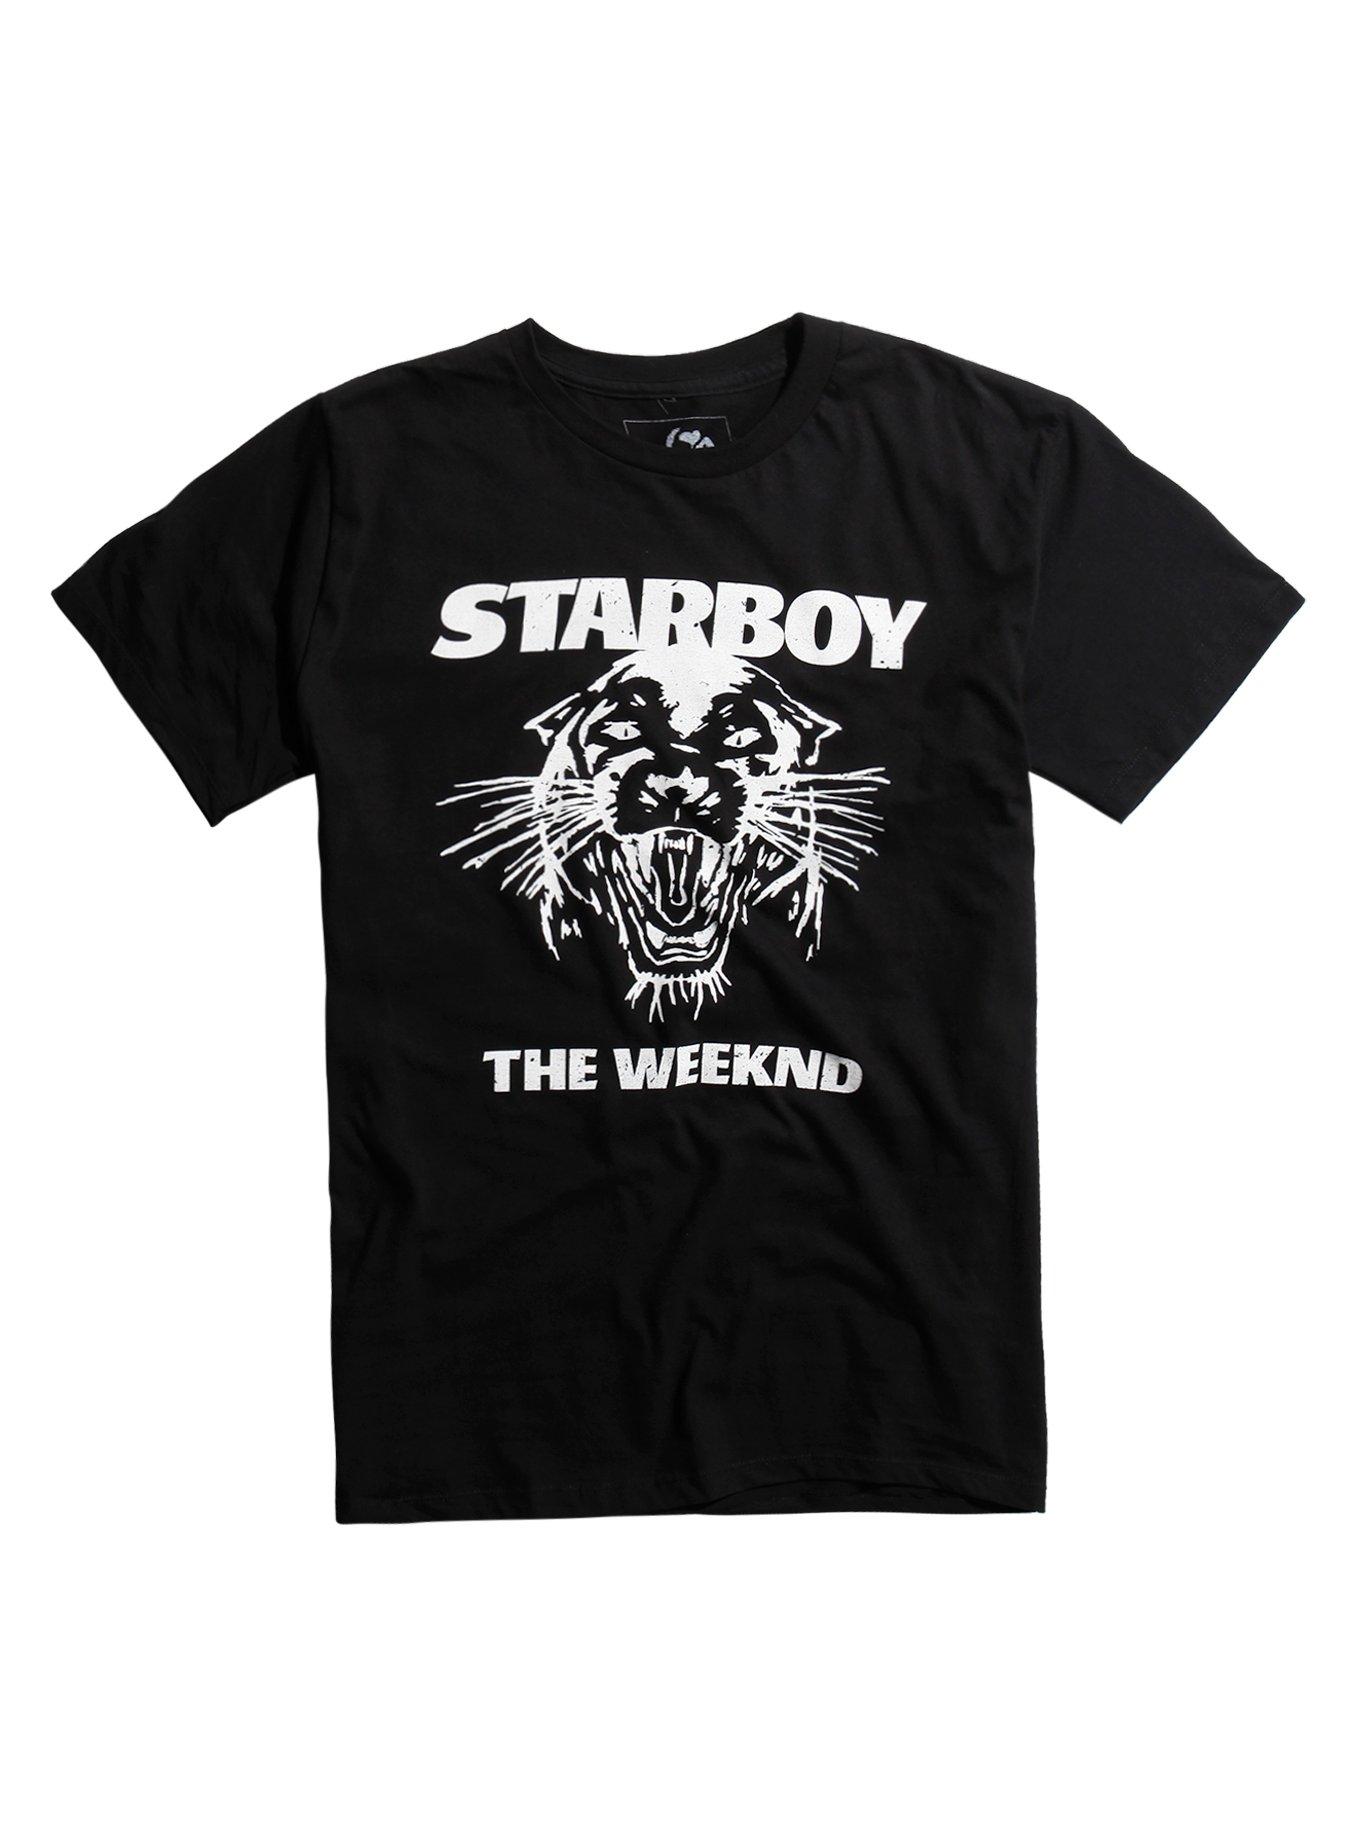 The Weeknd Starboy Panther XO Jacket